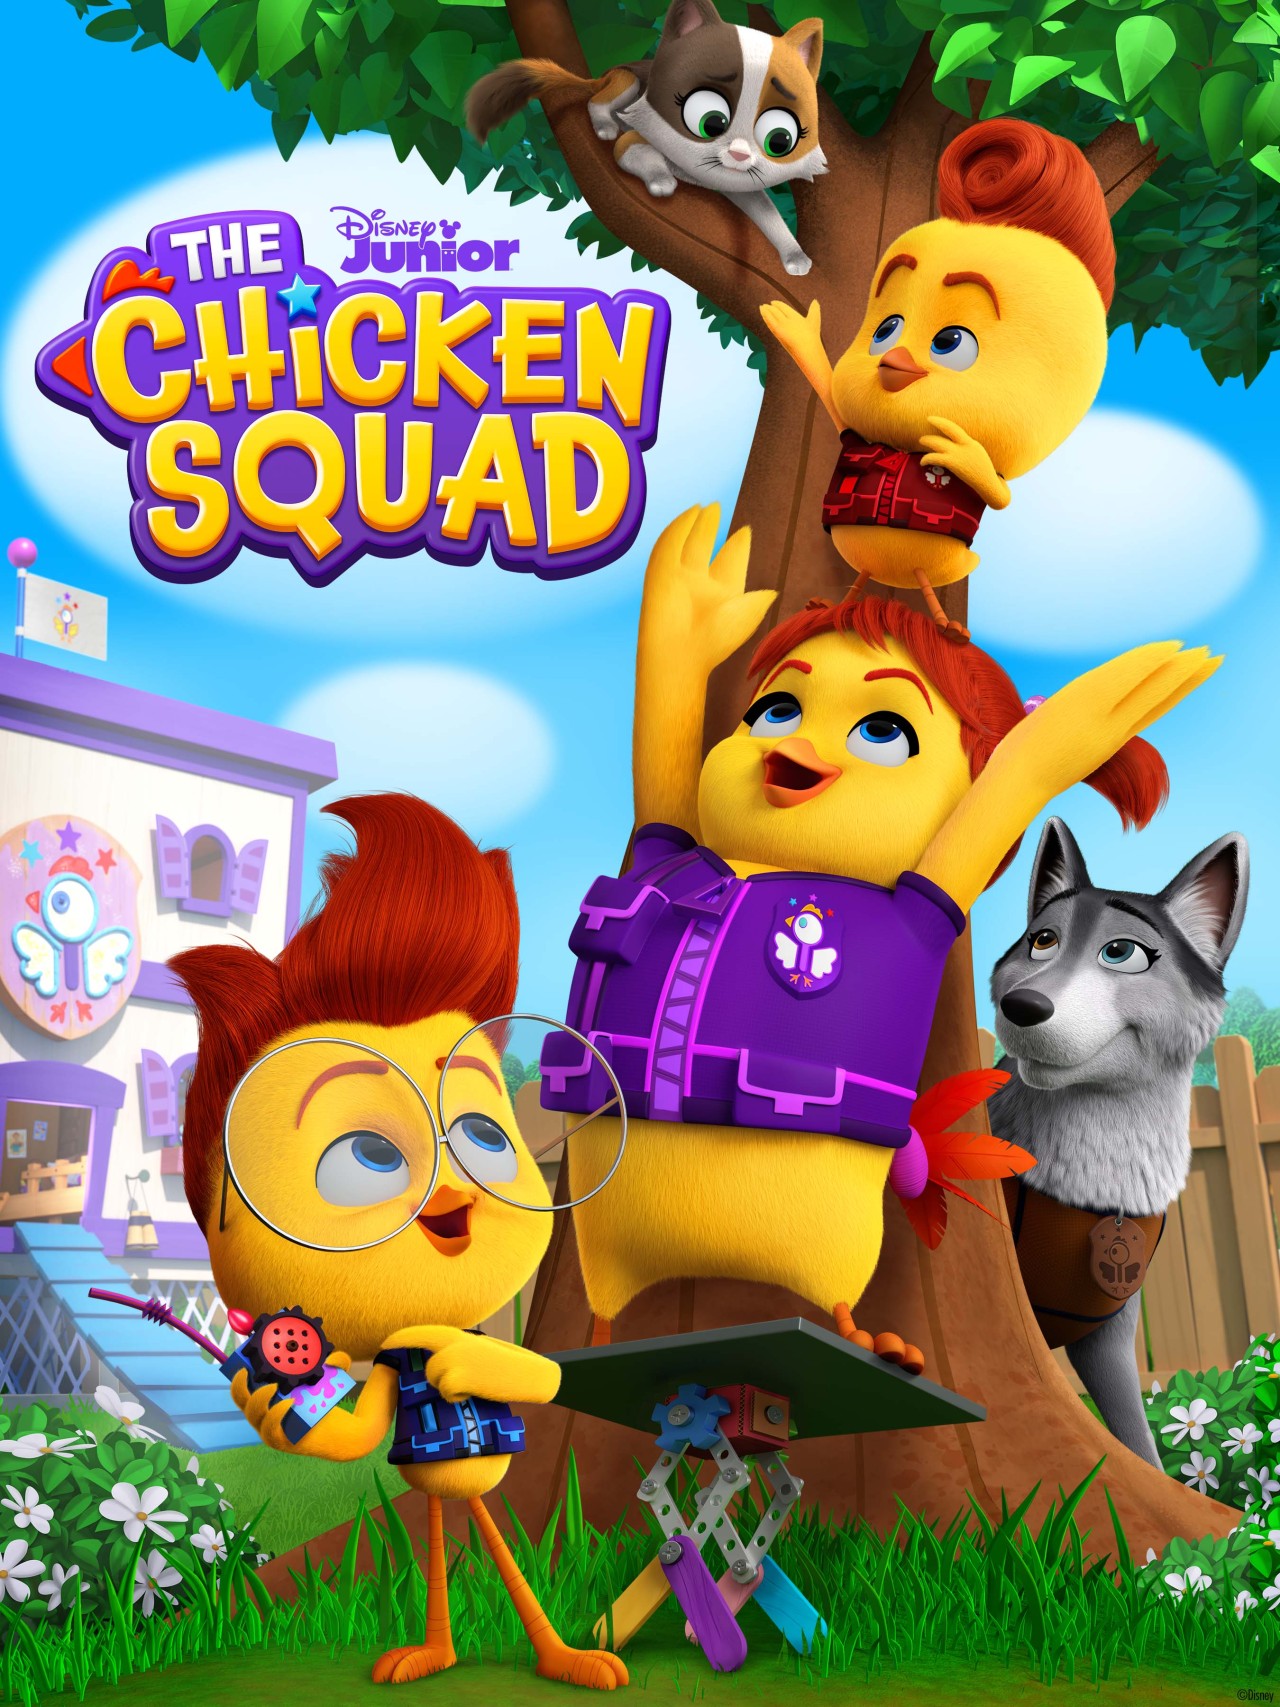 Disney Junior Announces Premiere Date and Guest Cast for The Chicken Squad Disney Junior’s egg-citing new animated comedy-adventure series “The Chicken Squad” premieres FRIDAY, MAY 14 (7:30 P.M. EDT/PDT), with two back-to-back episodes on Disney...